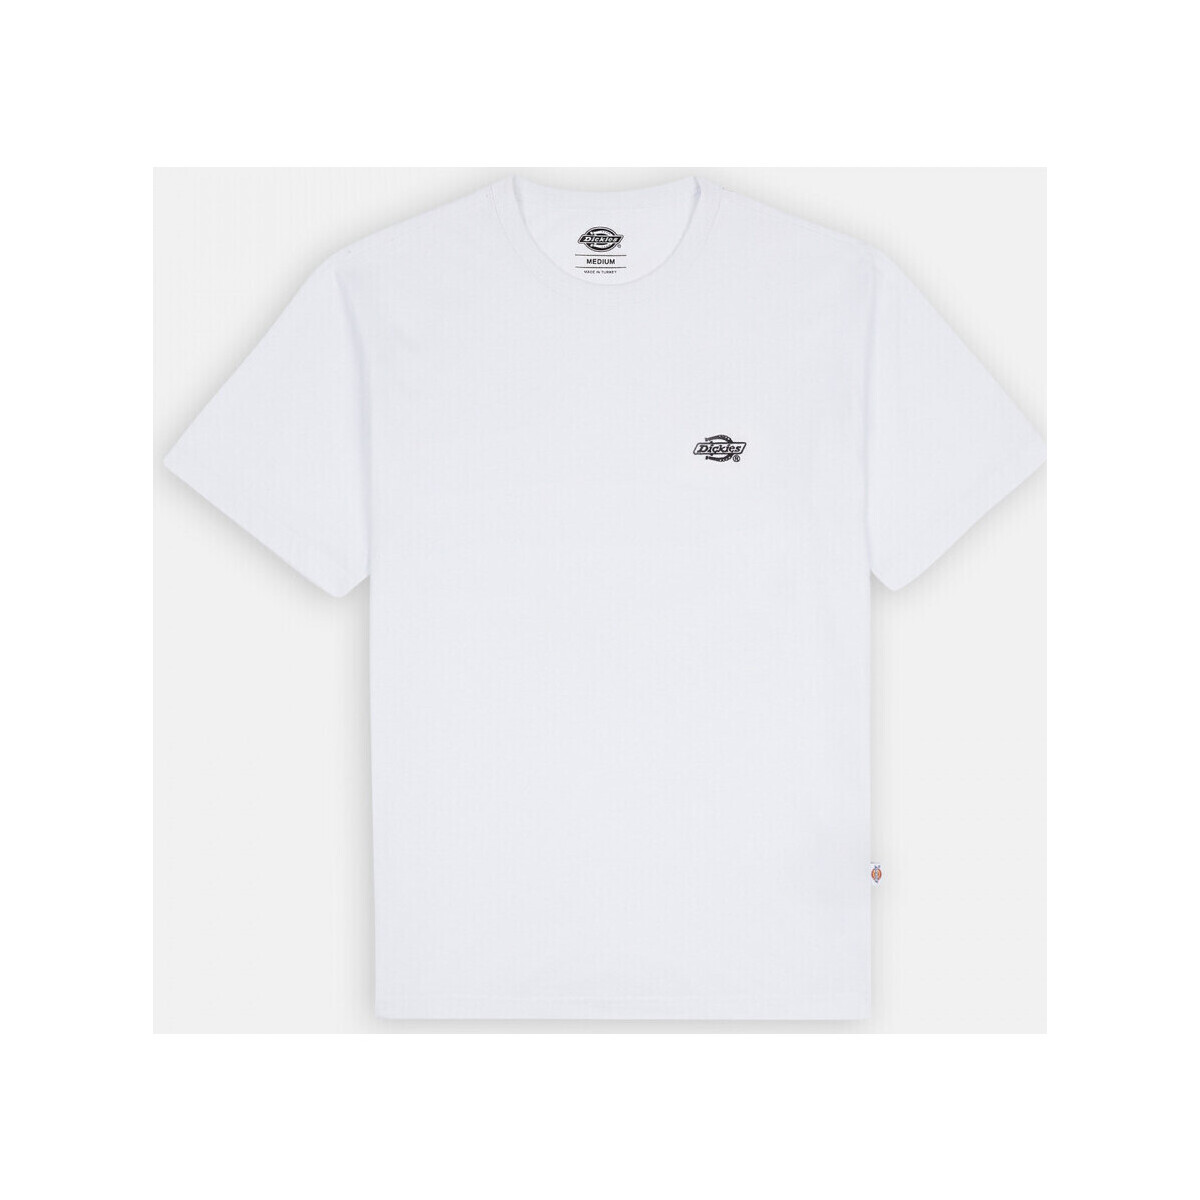 Textiel Heren T-shirts & Polo’s Dickies Summerdale tee ss Wit